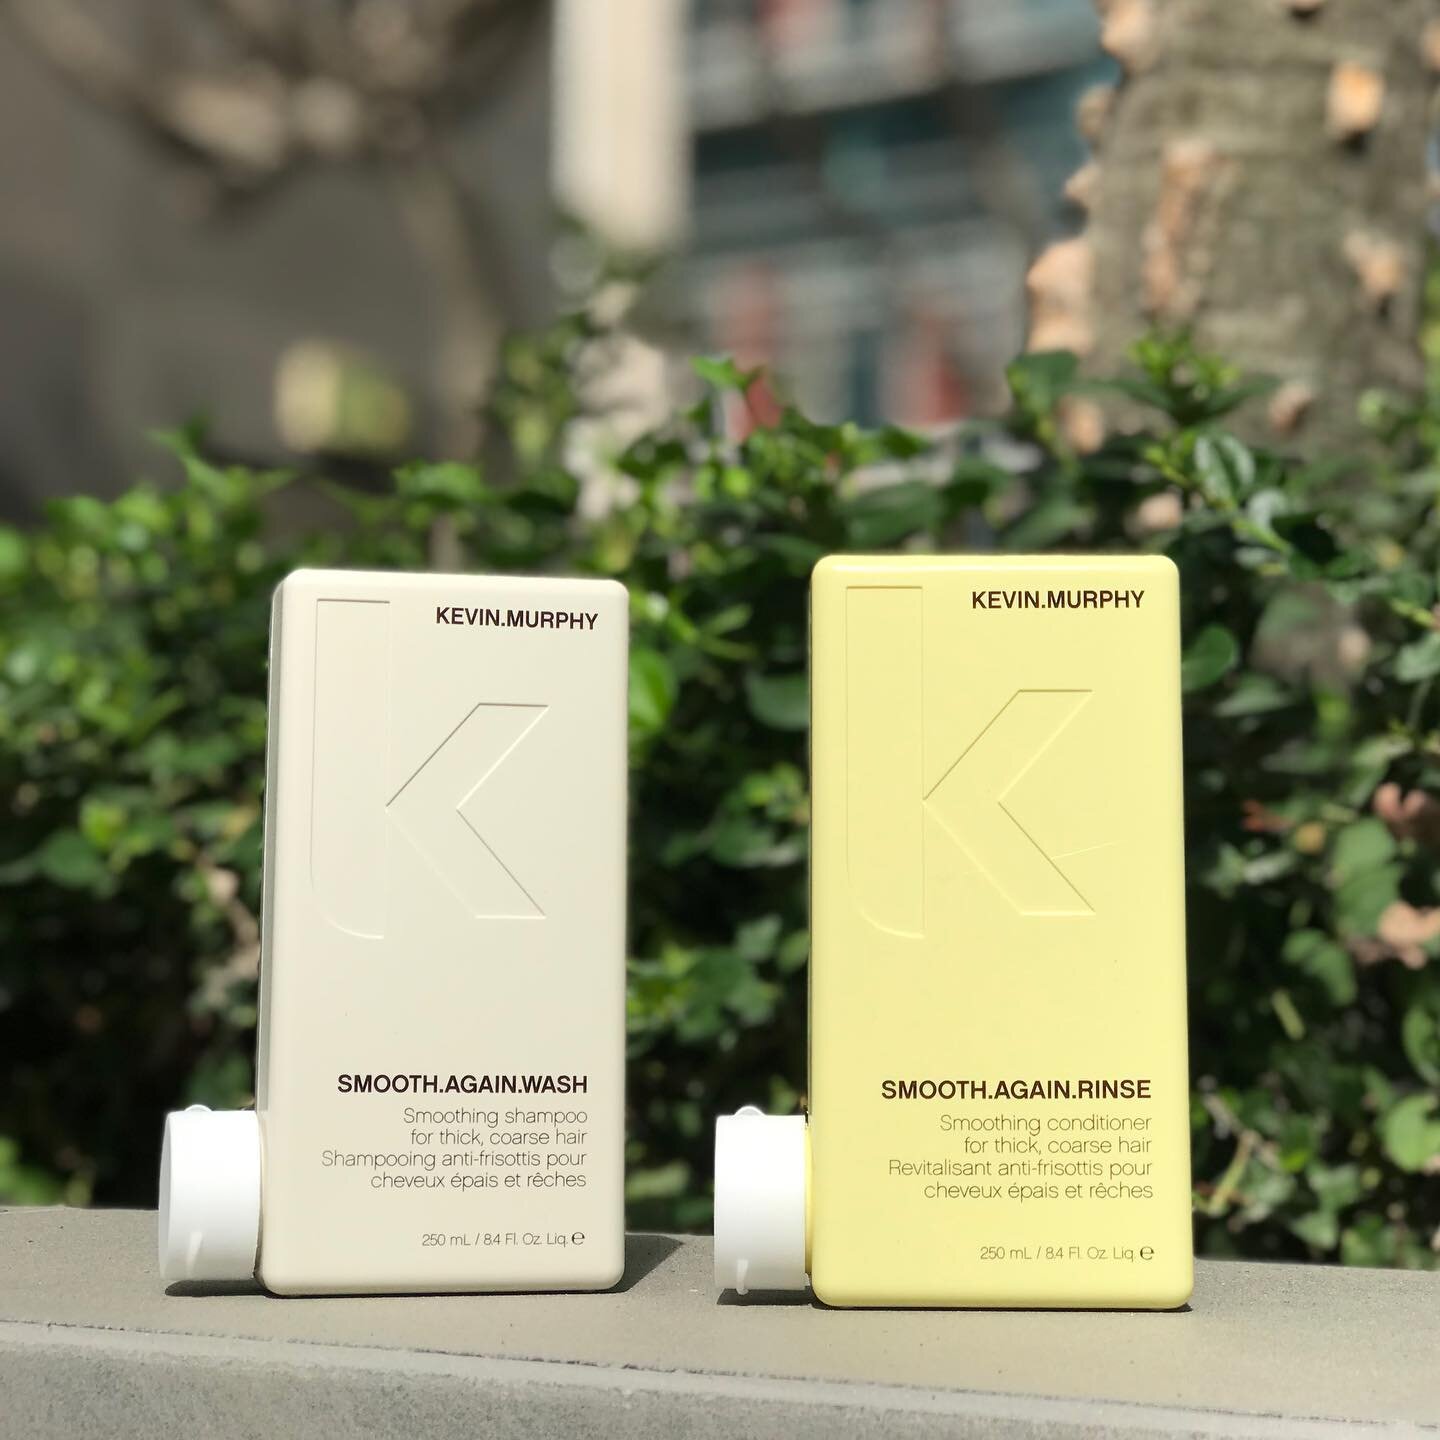 Kevin Murphy's Smooth line of haircare products is designed to tame frizz and leave your hair looking silky and smooth. Made with natural ingredients like Monoi and Tamanu oils, Shea Butter, and Murumuru Butter, this range includes shampoo, condition